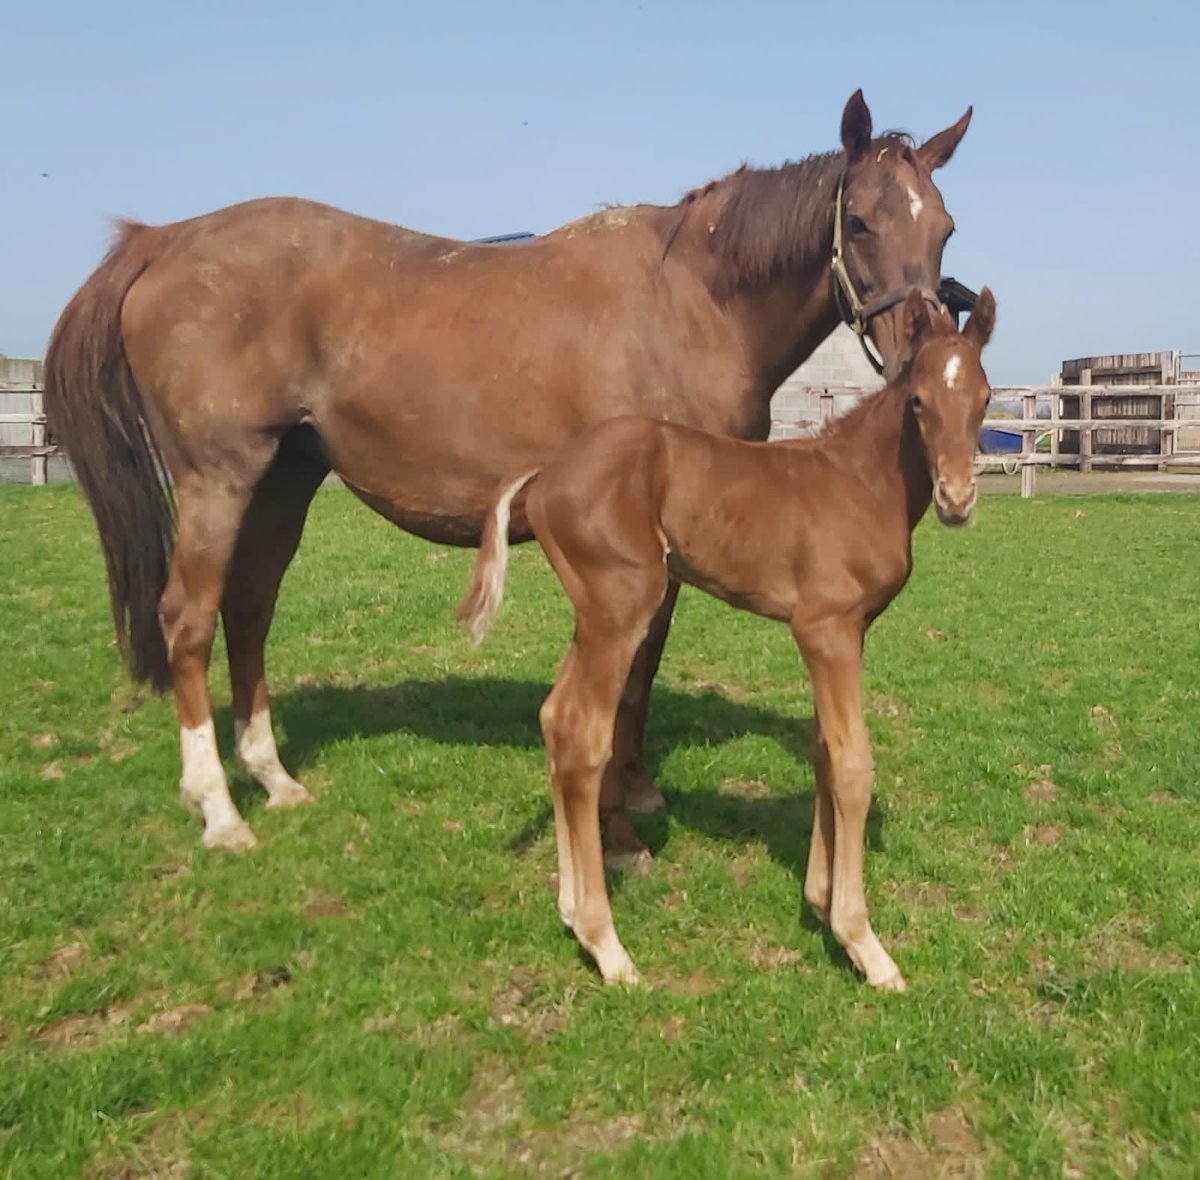 We are delighted with our penultimate foal, a gorgeous #NightofThunder colt out of Giants Causeway mare Il Palazzo #2021foalphotos #RPfoalgallery @ThoroughbrdTale @rpbloodstock @DarleyStallions